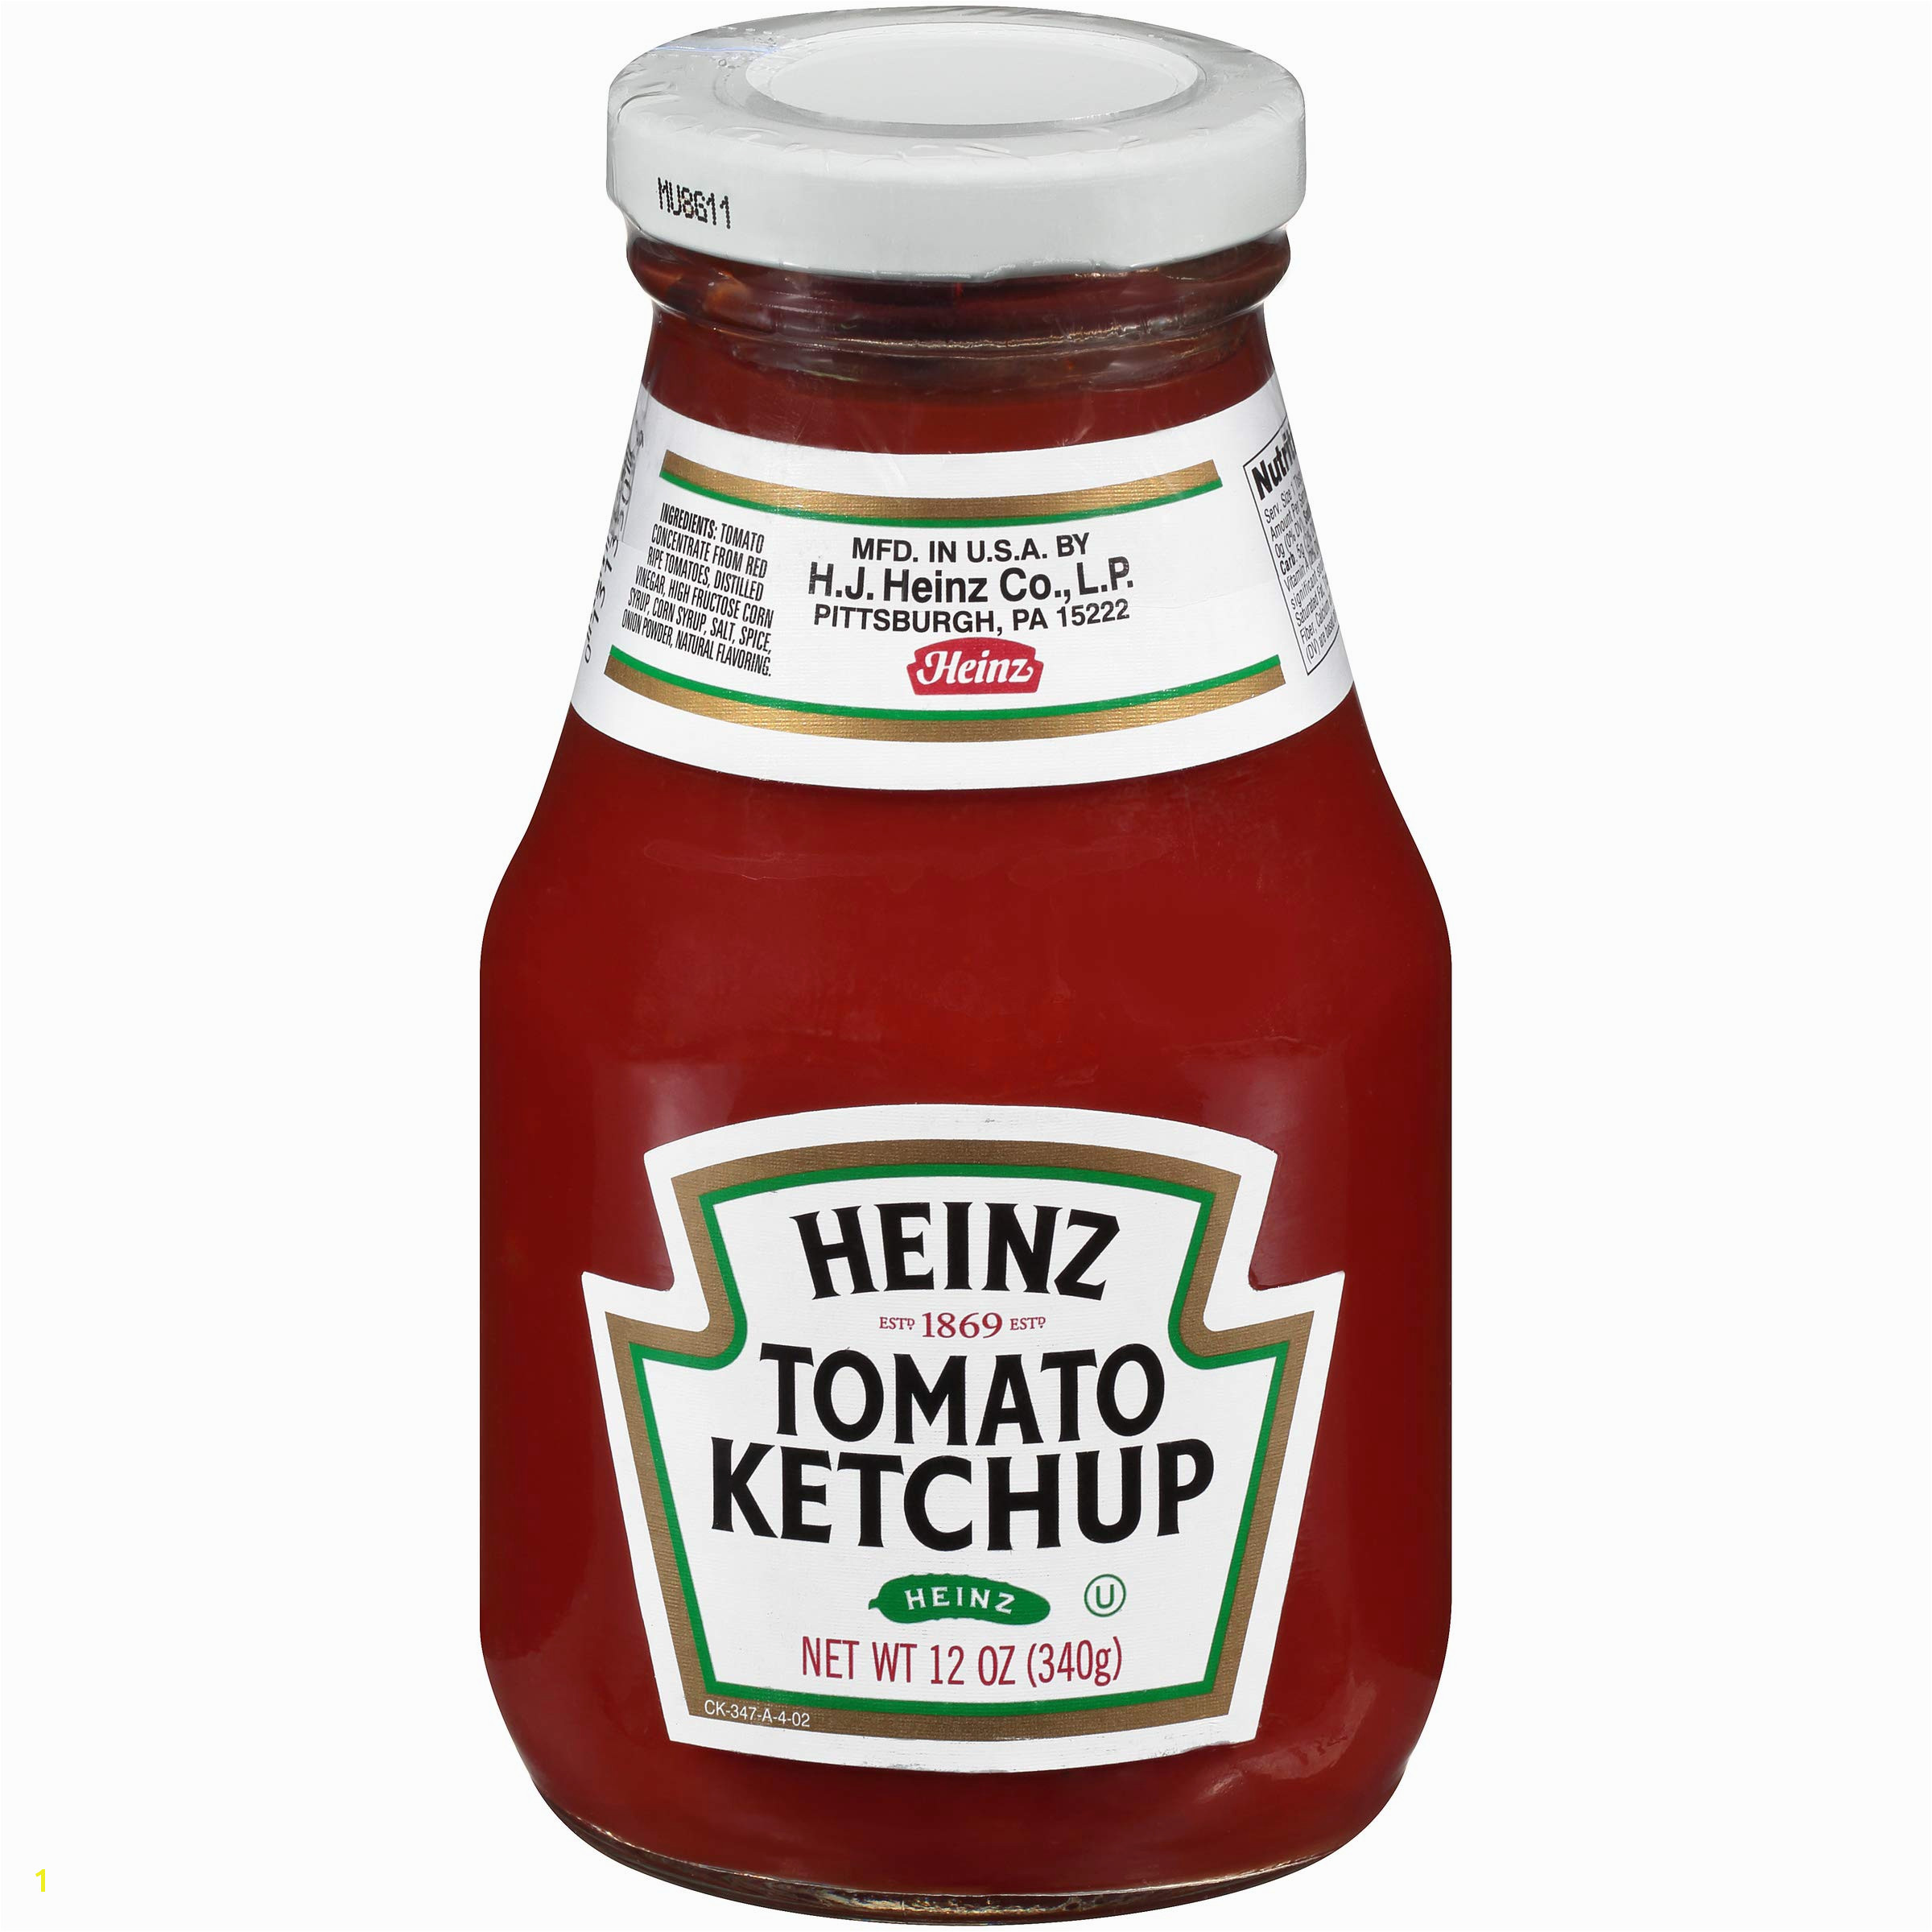 Amazon Heinz Tomato Ketchup 12 oz Wide Mouth Glass Jar Pack of 24 Grocery & Gourmet Food